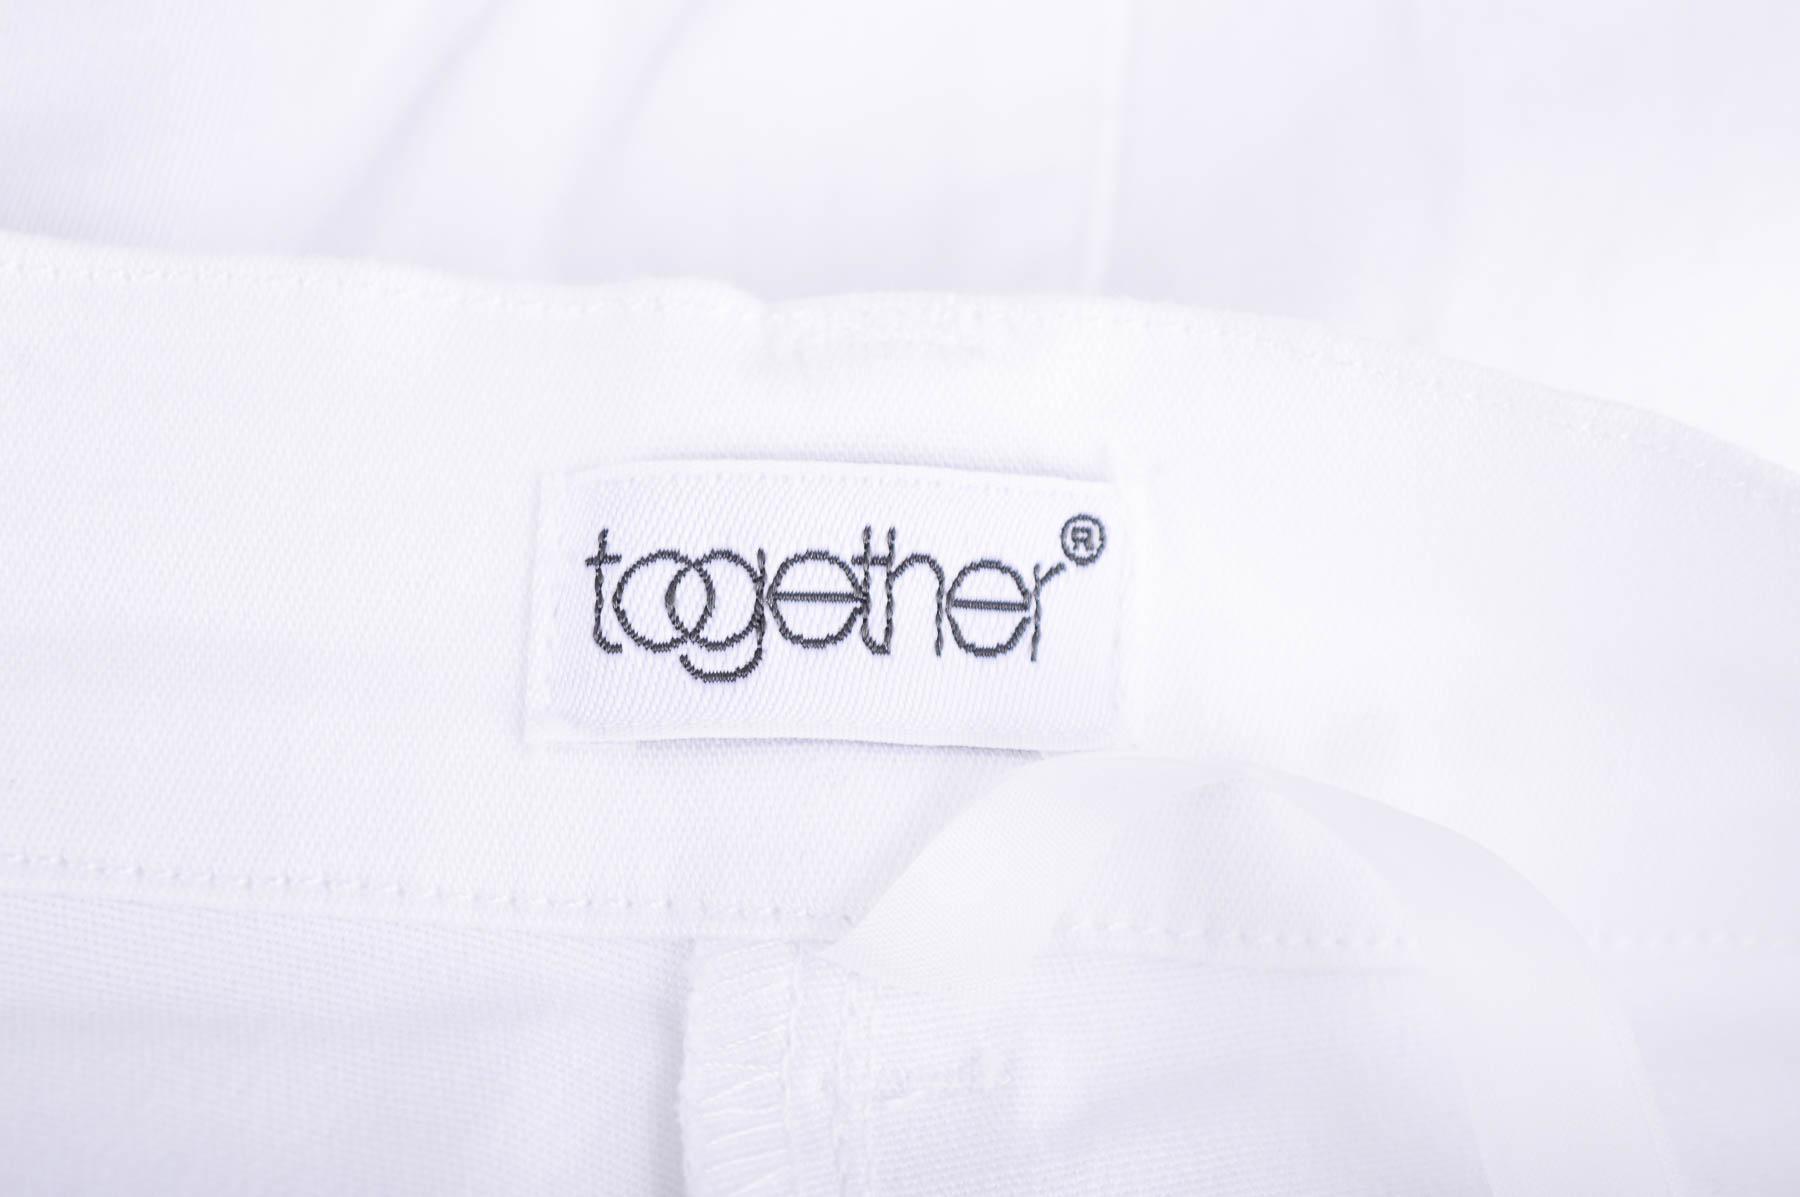 Women's trousers - Together - 2